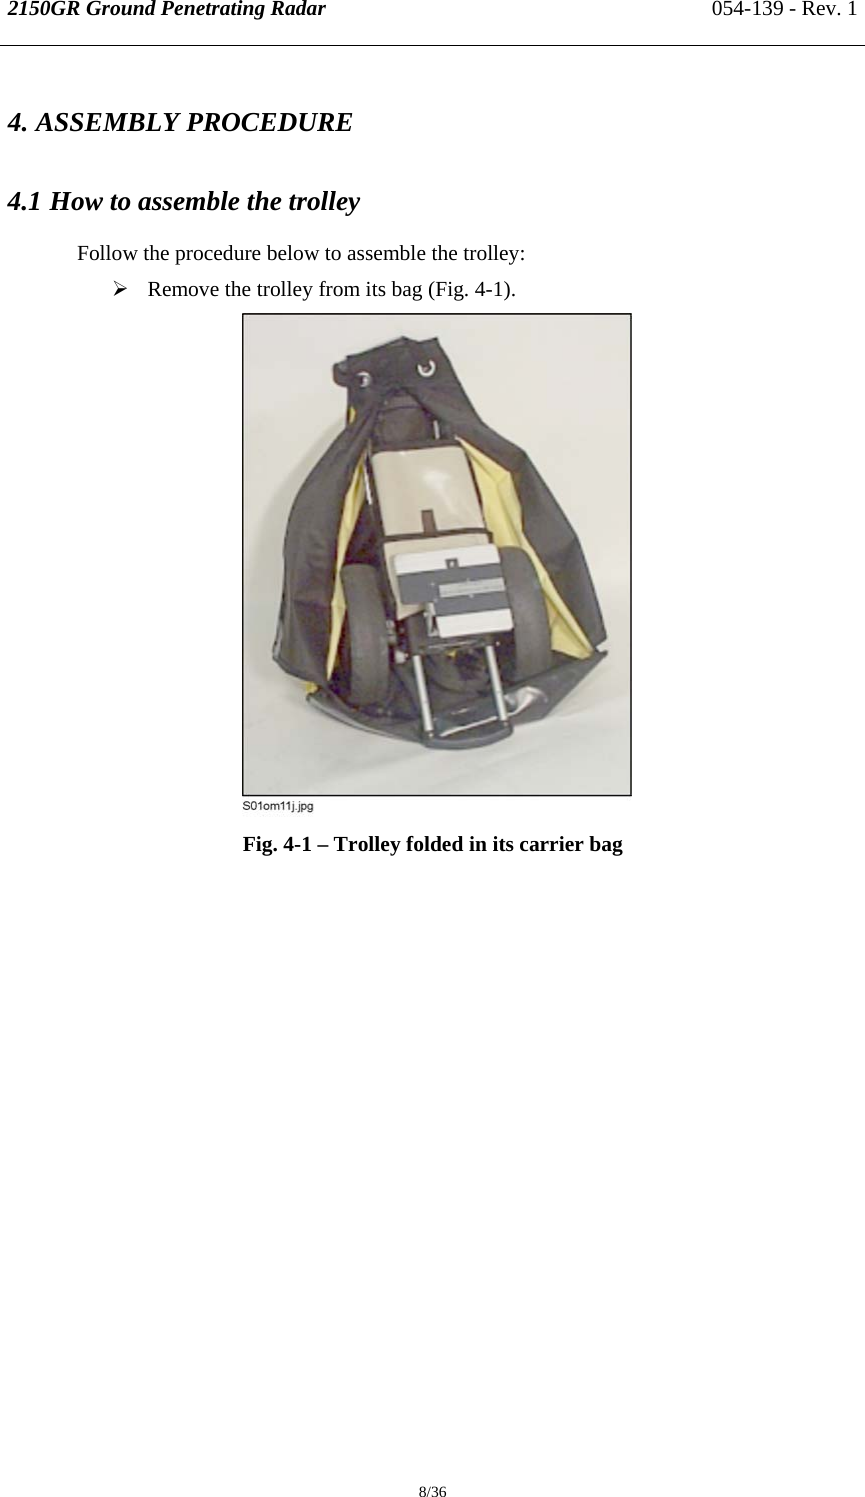 2150GR Ground Penetrating Radar 054-139 - Rev. 1  8/36 4. ASSEMBLY PROCEDURE 4.1 How to assemble the trolley Follow the procedure below to assemble the trolley: ¾ Remove the trolley from its bag (Fig. 4-1).  Fig. 4-1 – Trolley folded in its carrier bag   